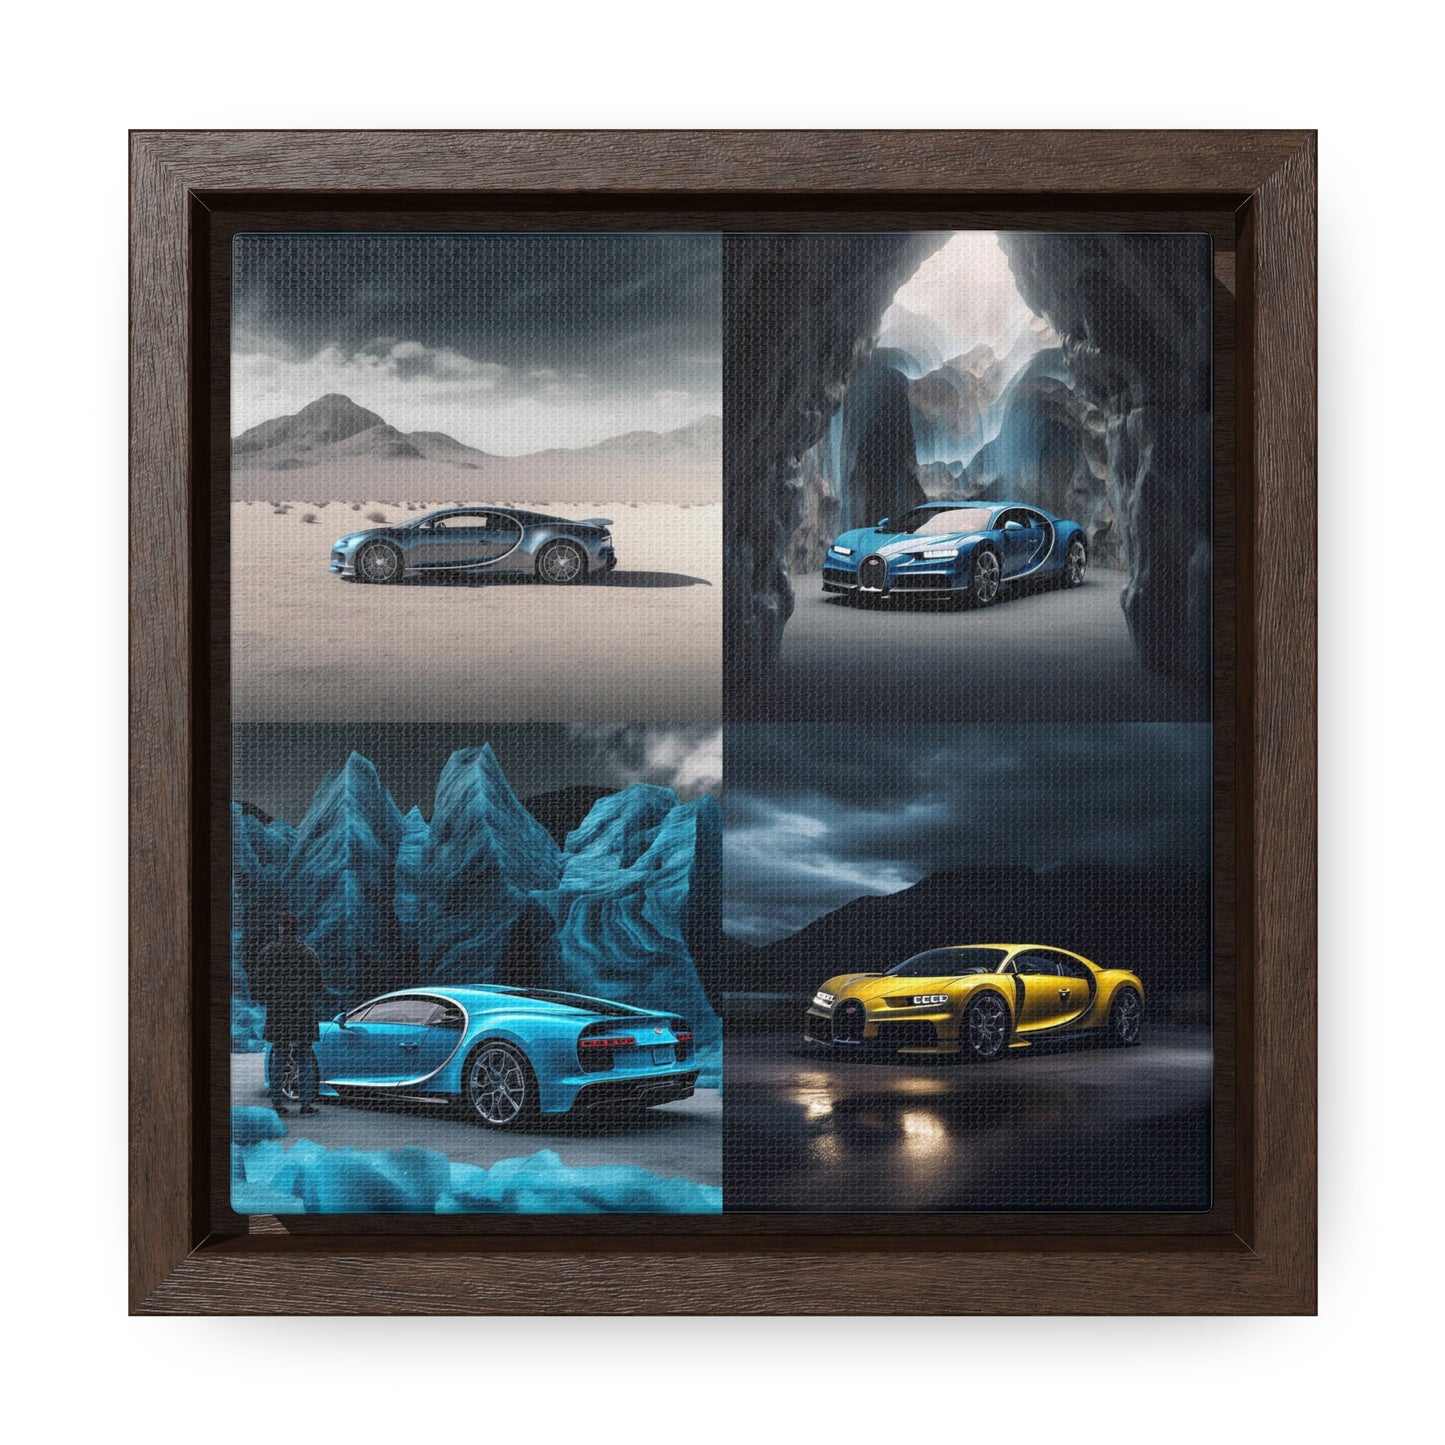 Gallery Canvas Wraps, Square Frame Bugatti Real Look 5